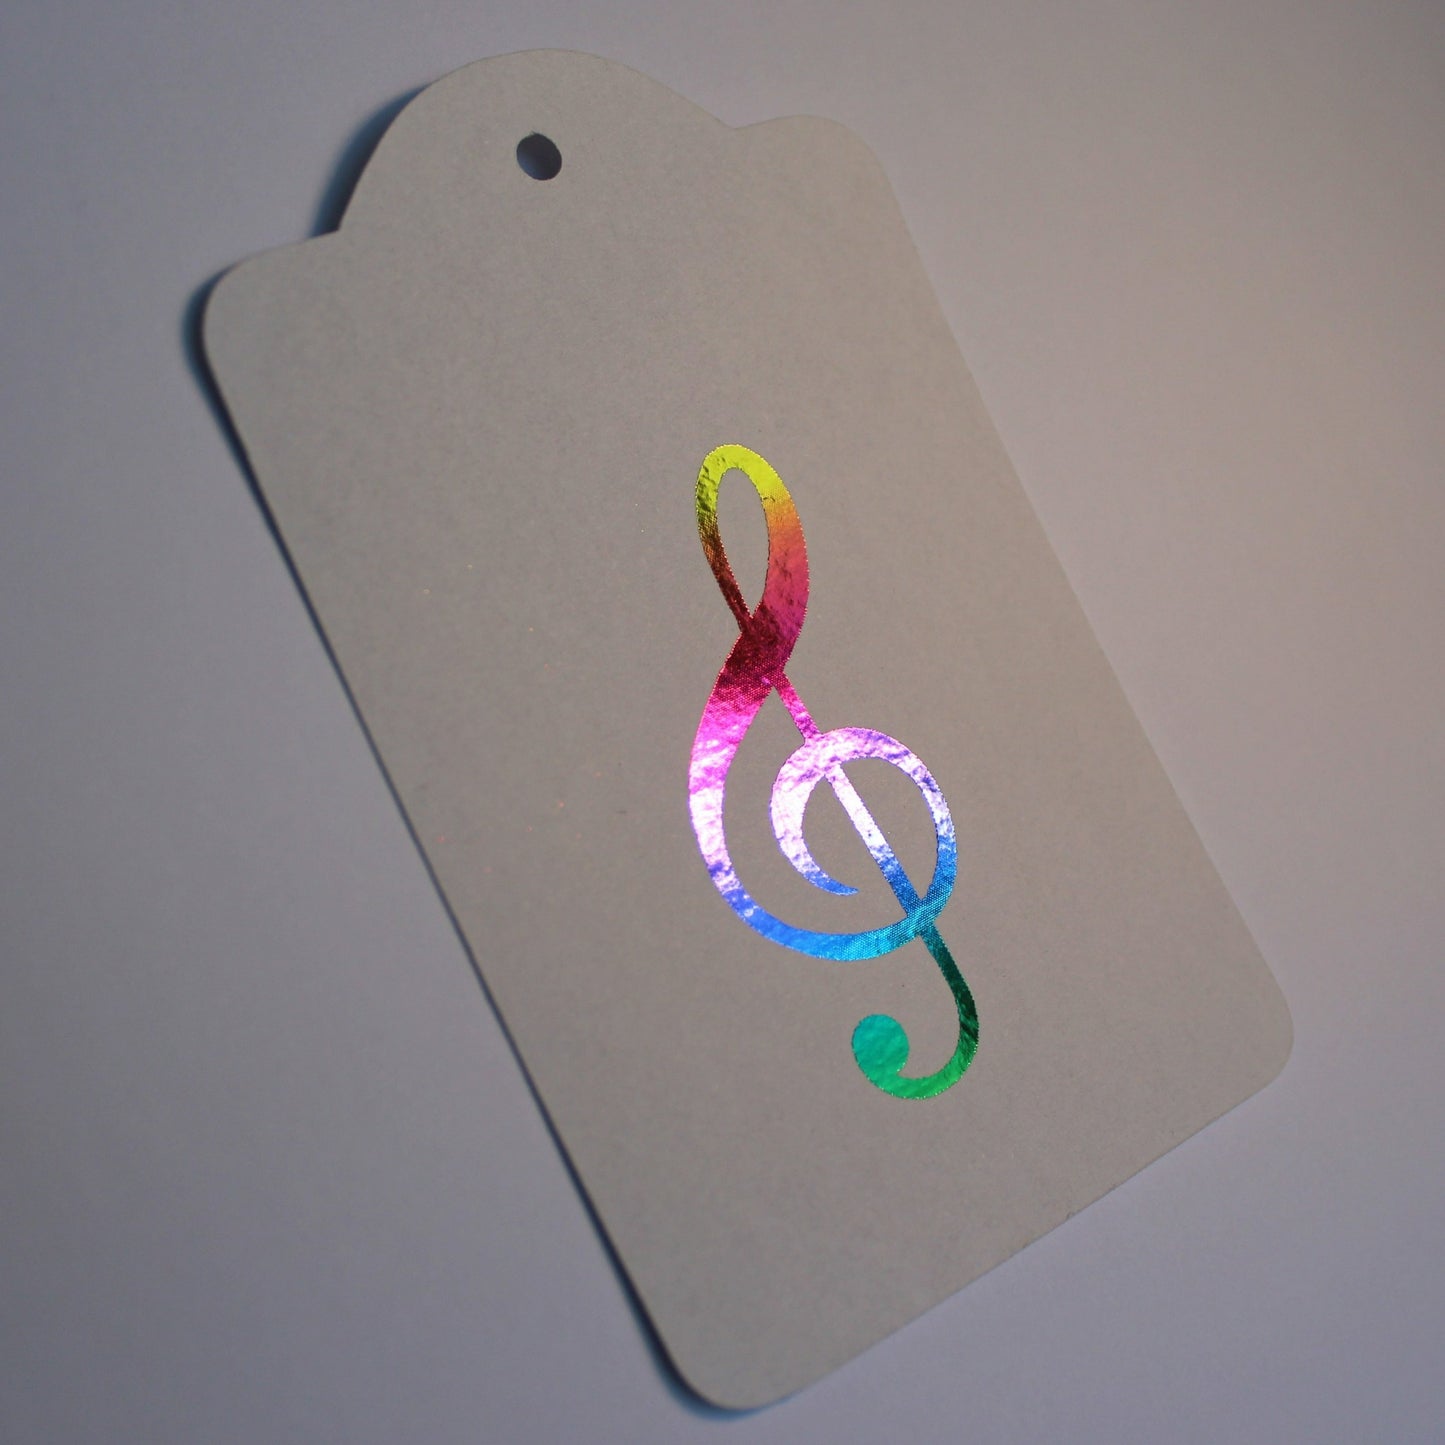 Oblong white tag with a treble clef in the centre, displayed in multicoloured shiny foil.